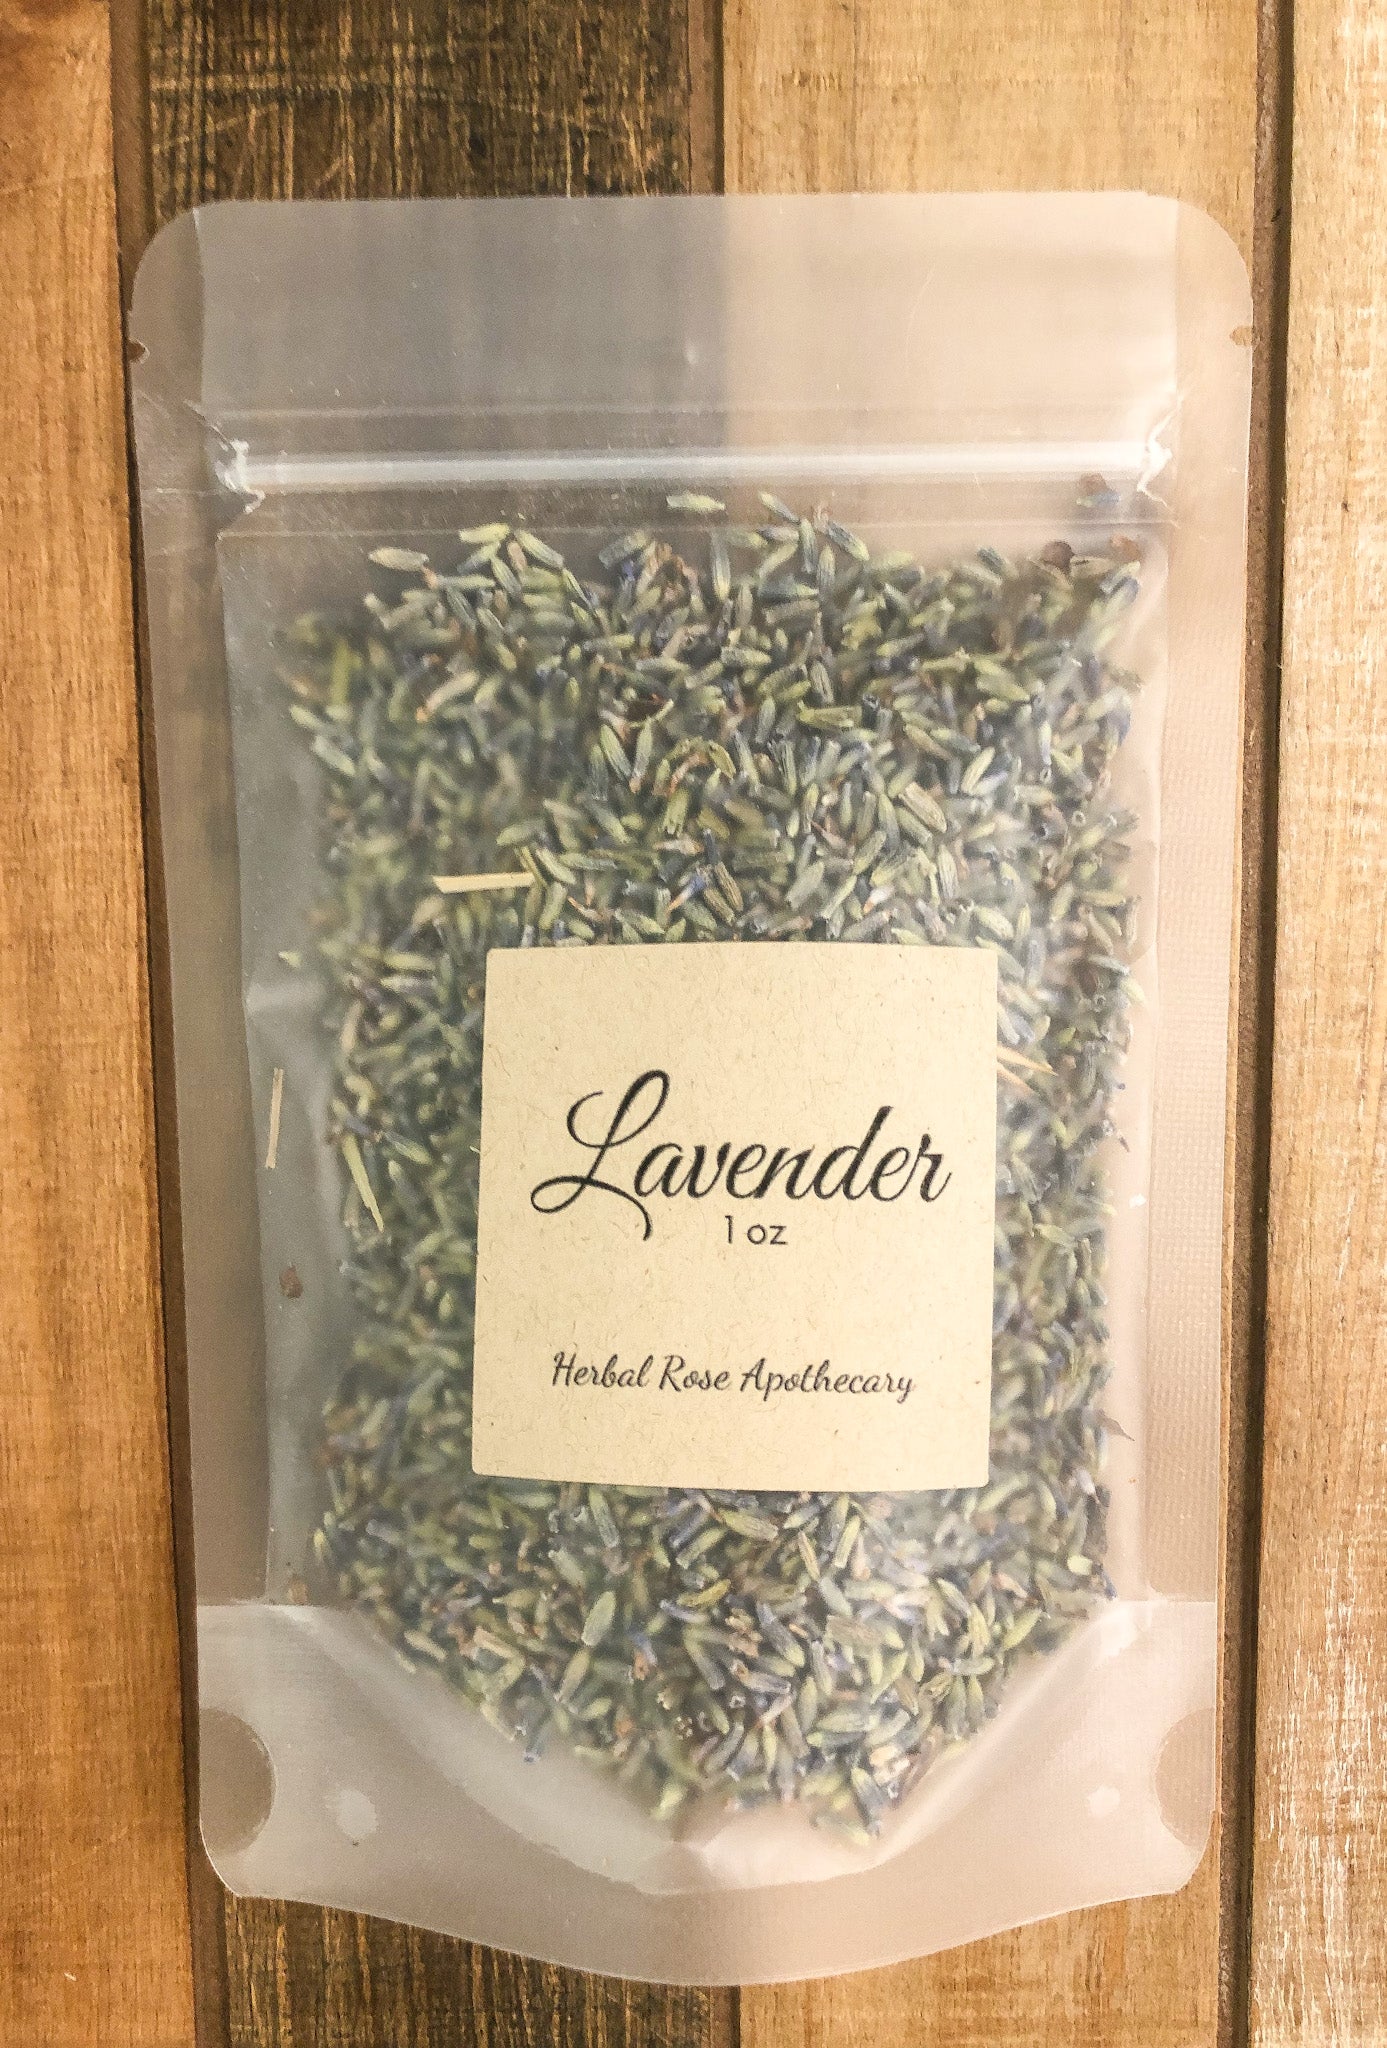 1oz bag of dried lavender in a clear plastic bag with a wooden background